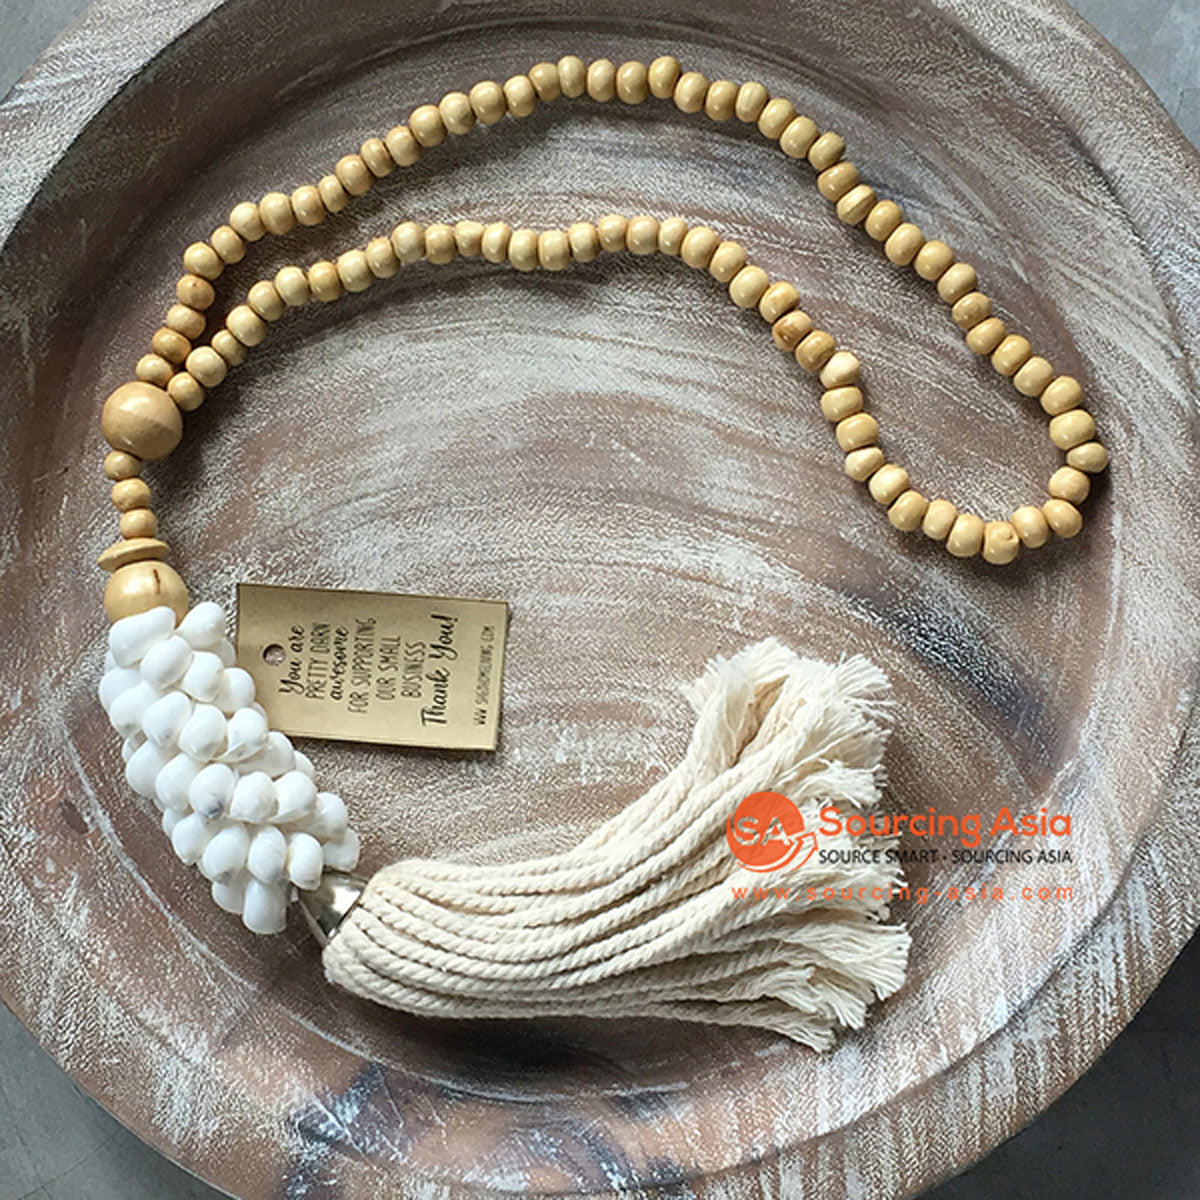 SHL047-6 NATURAL TIMBER BEADS AND WHITE SHELL DECORATIVE TASSEL WITH MACRAME YARN